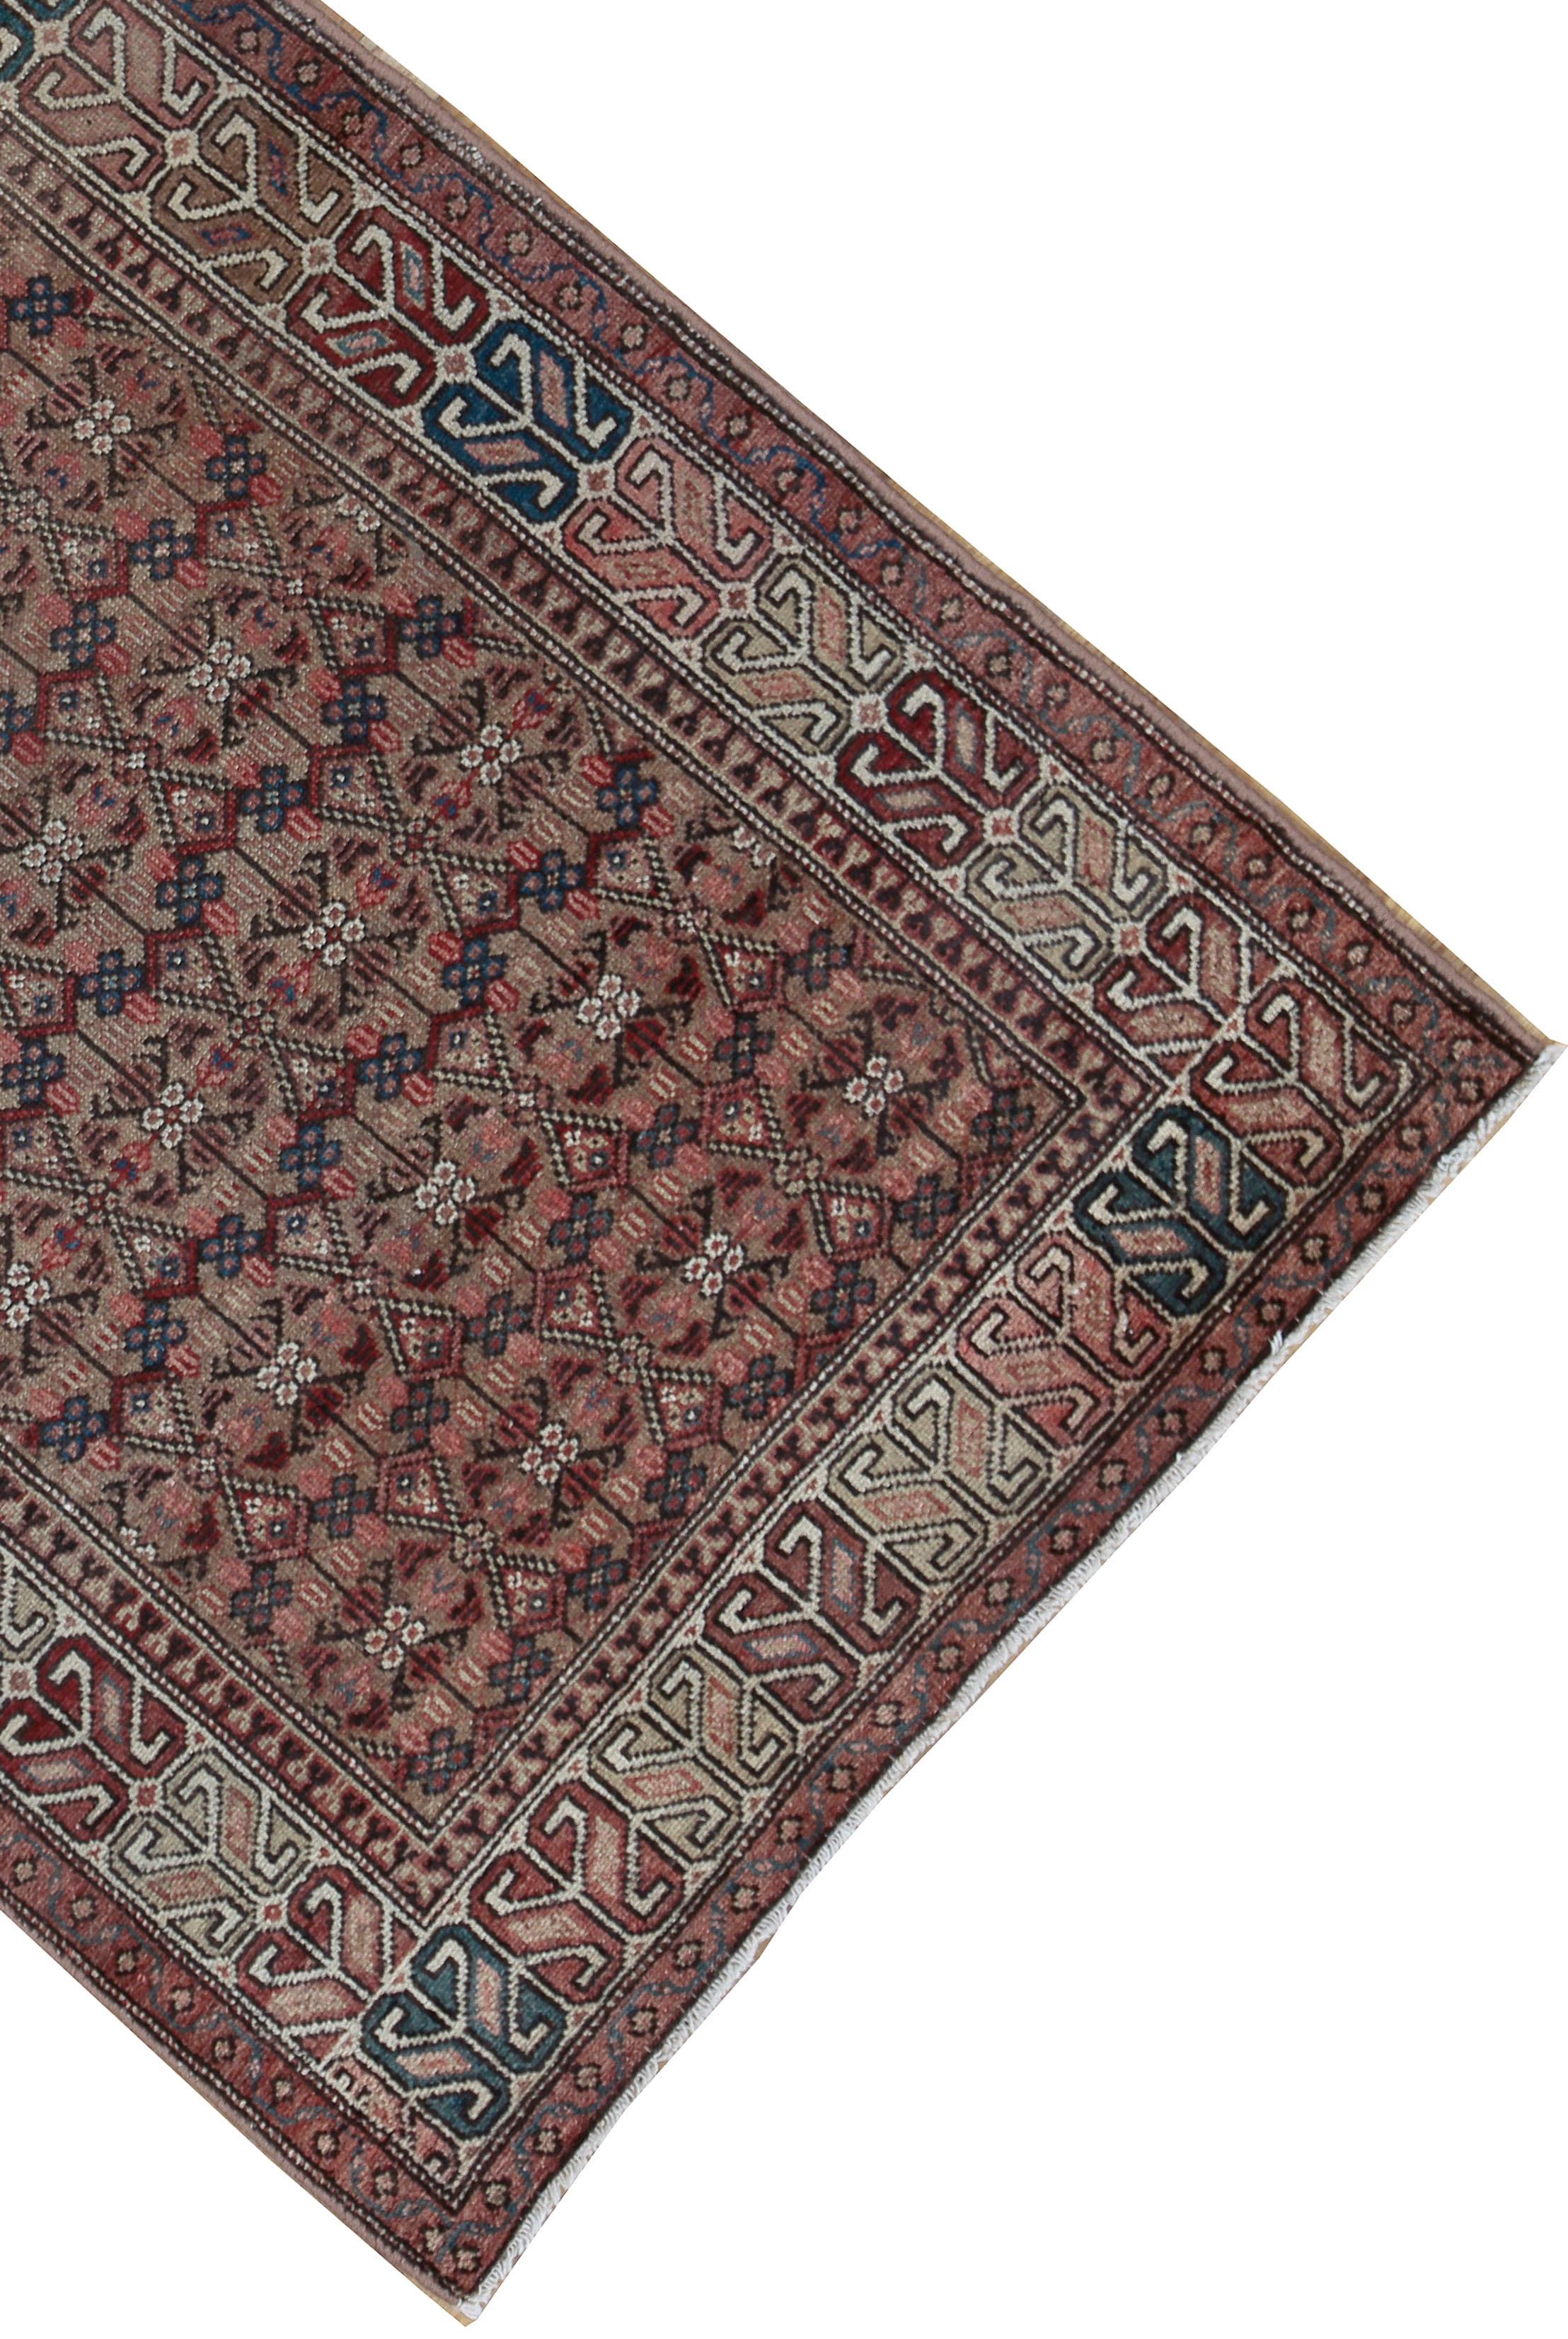 Antique Persian Malayer Runner  3' x 6'9 In Good Condition For Sale In New York, NY